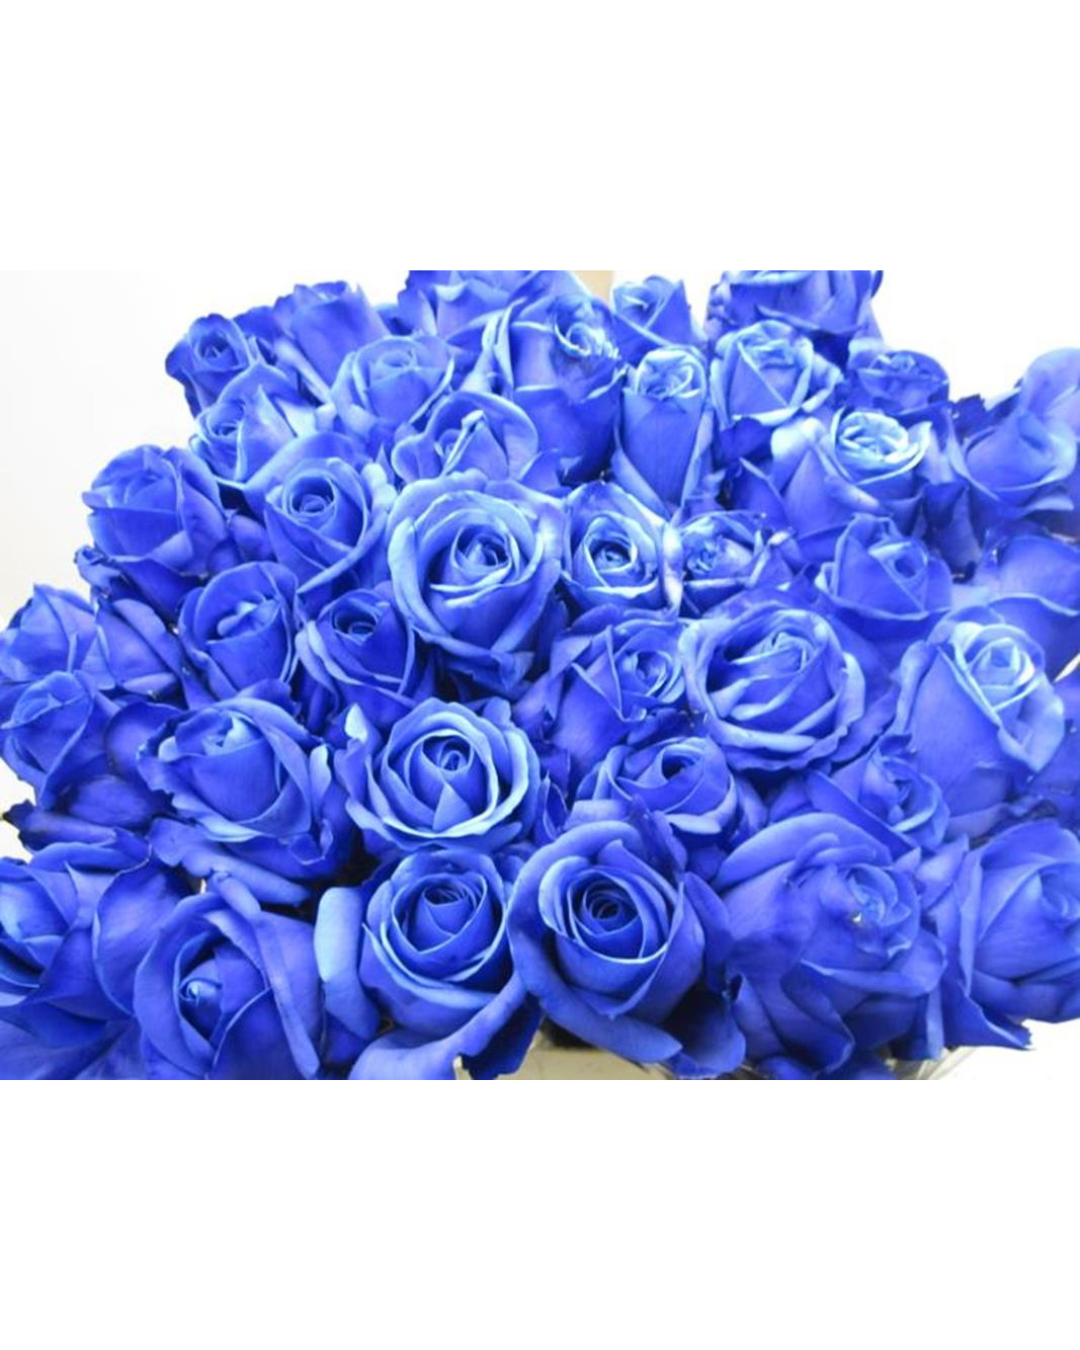 Dyed Blue Roses